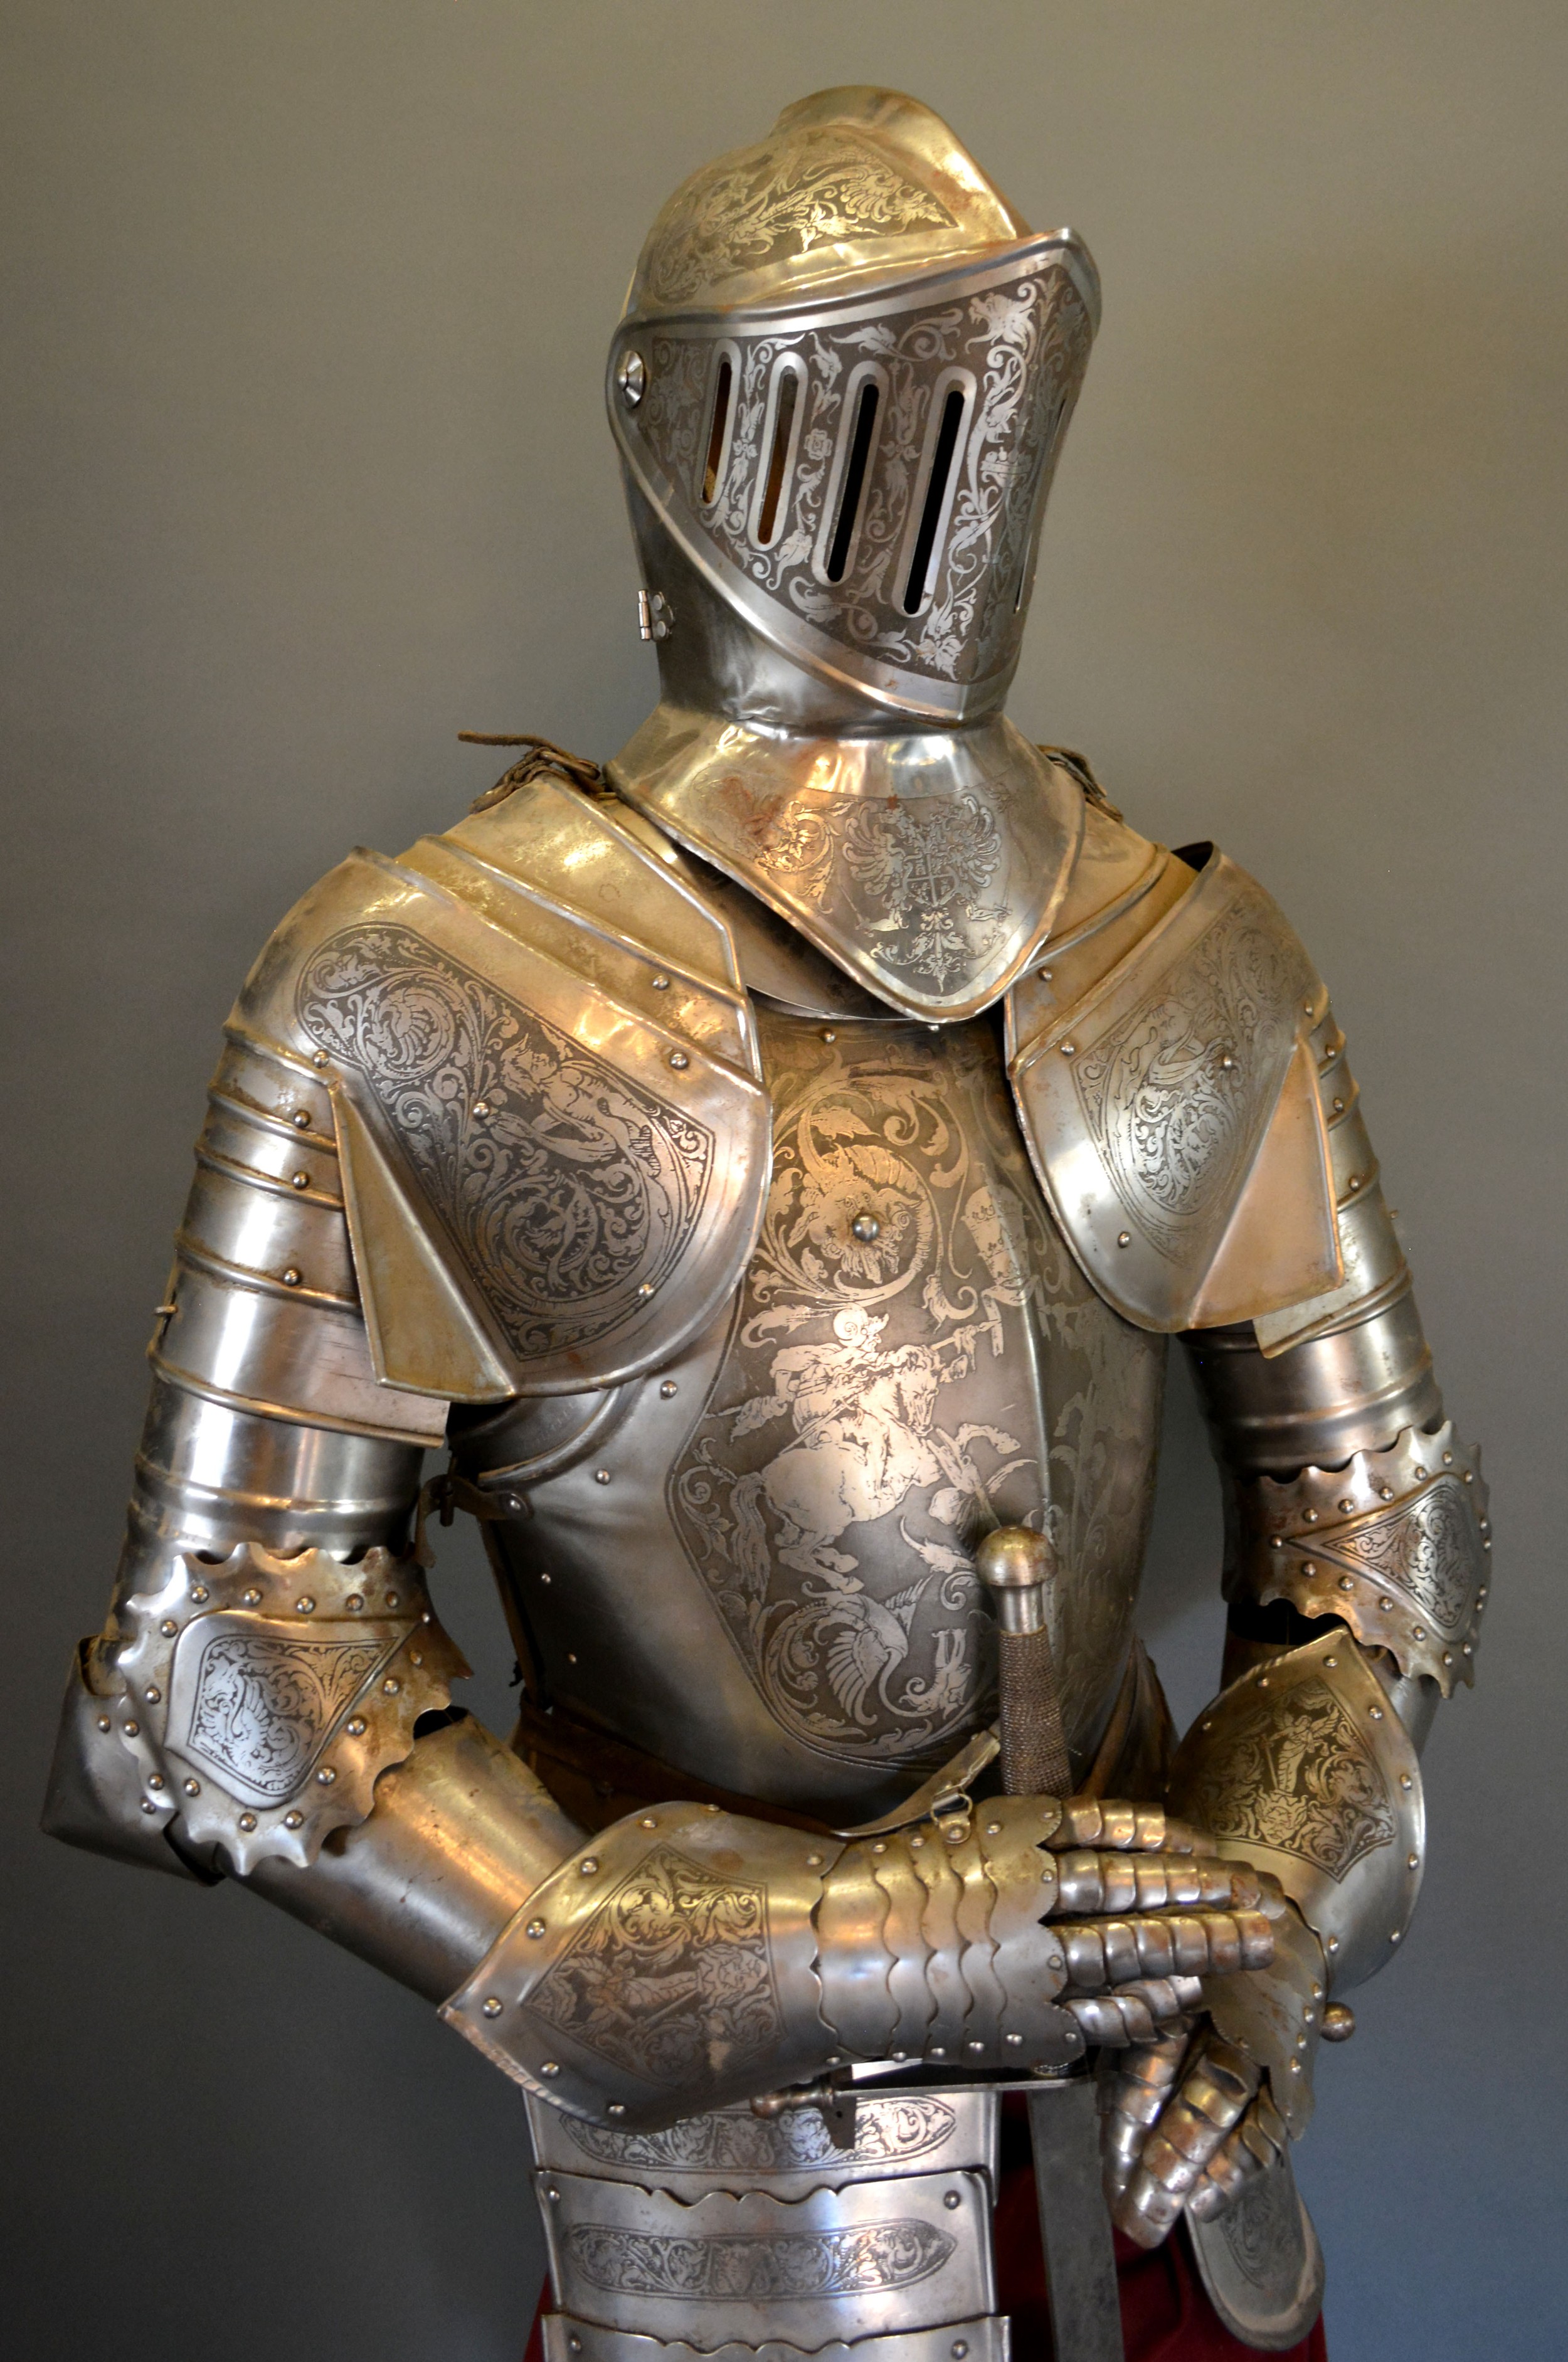 A 16th Century Style Suit of Armour complete with sword upon a wooden plinth 197 cms tall - Image 2 of 2